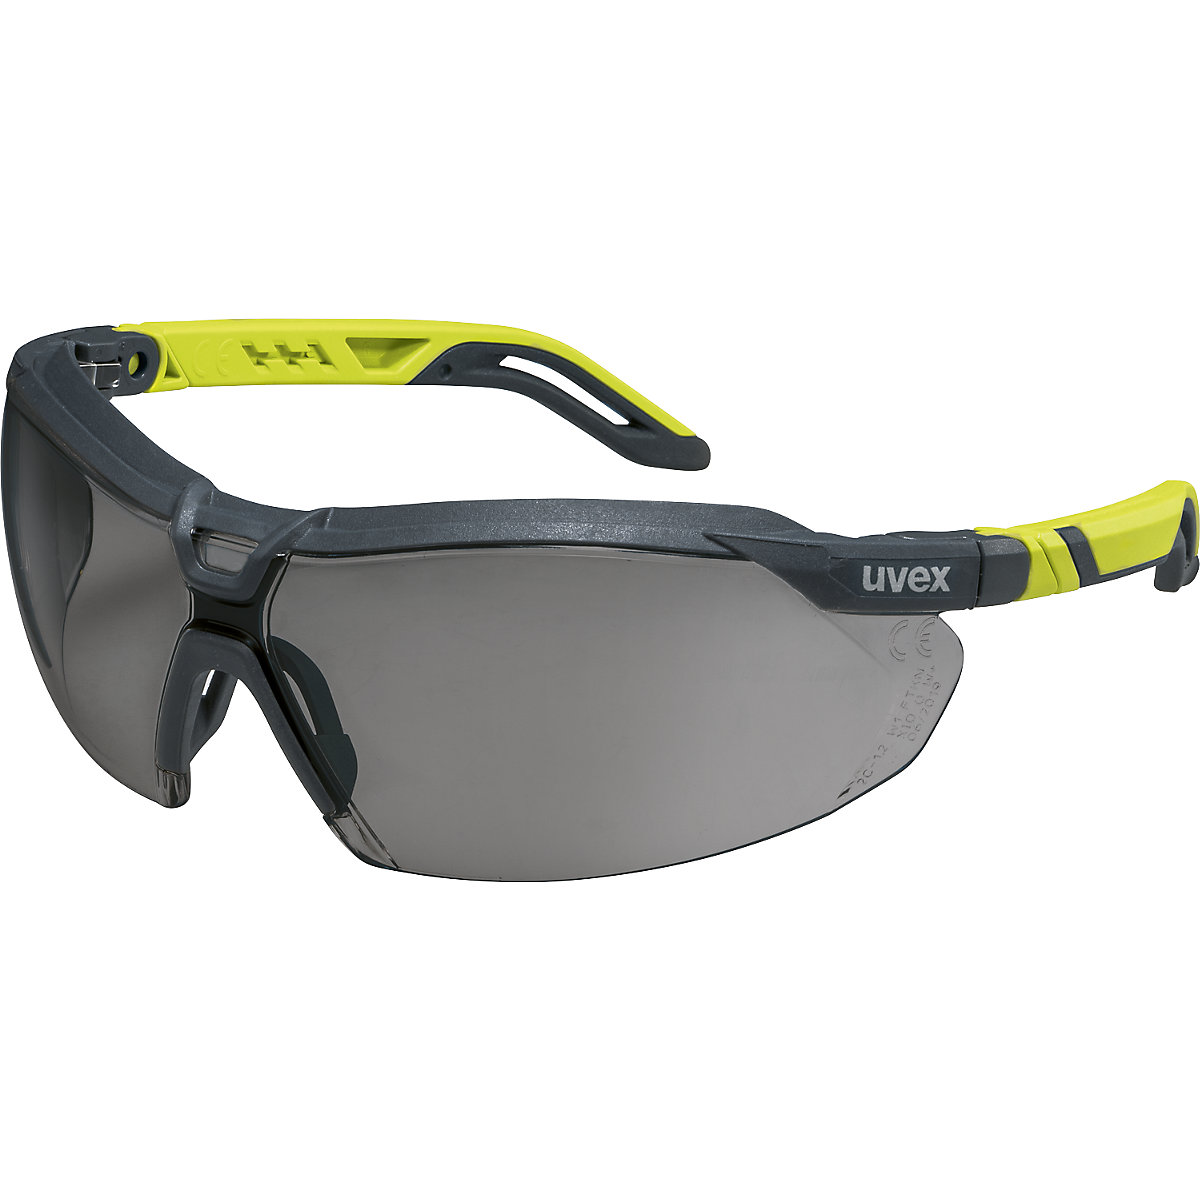 i-Series safety spectacles - Uvex